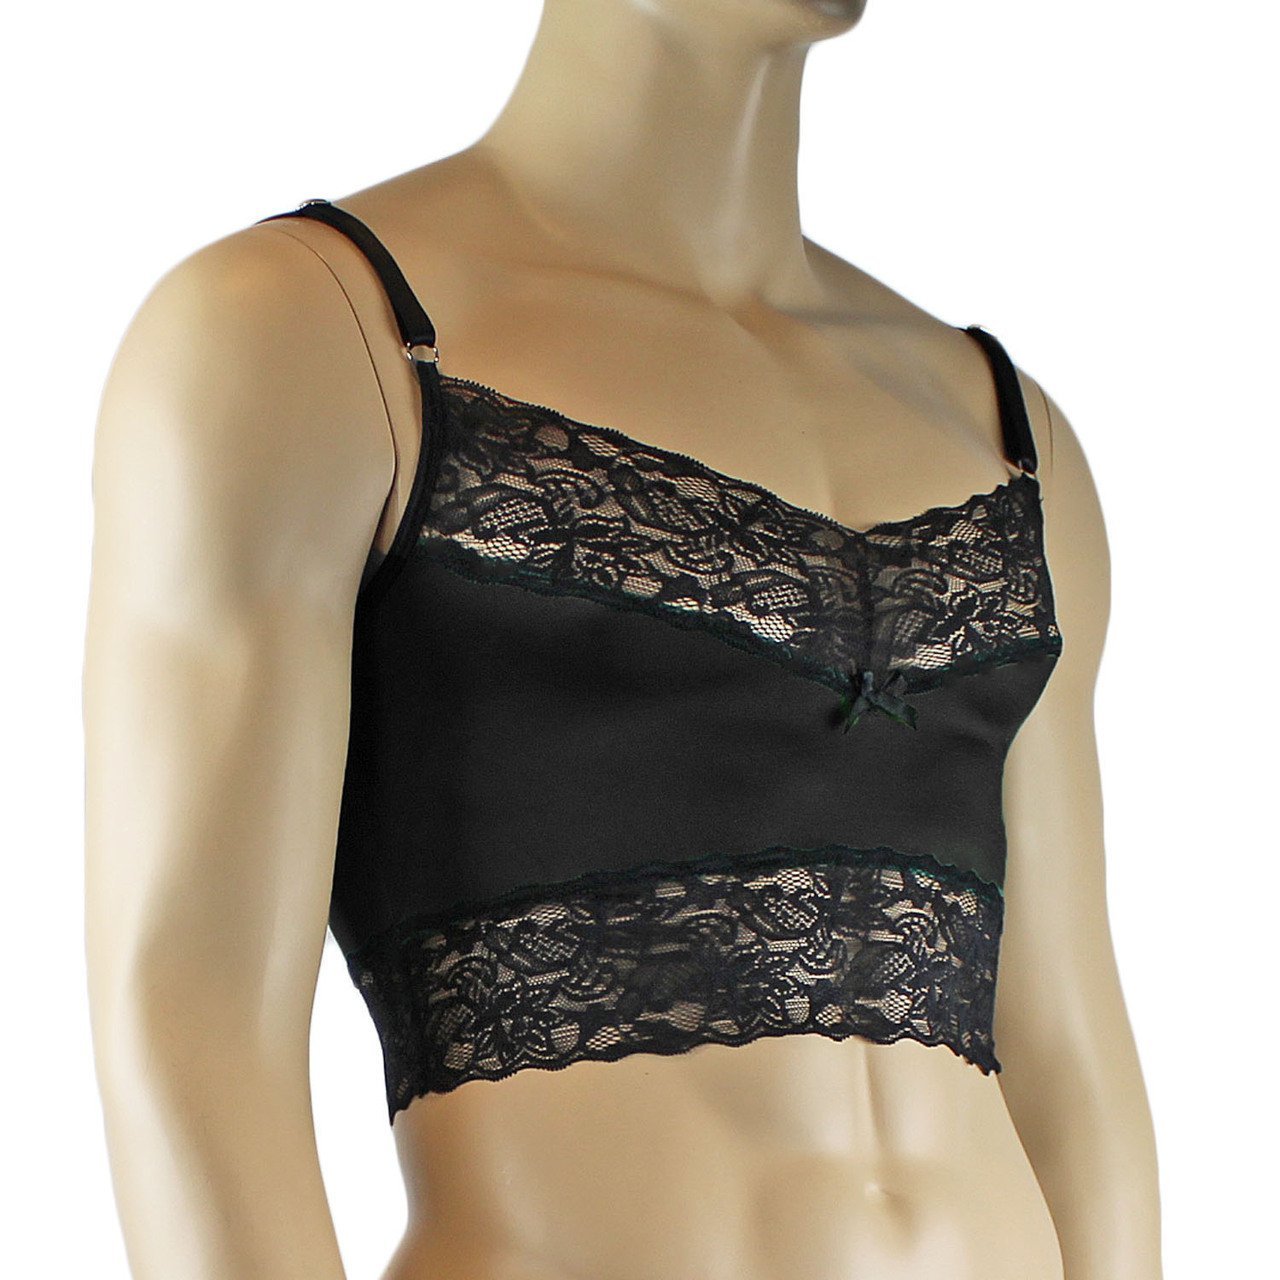 Mens Camisole Top with Lace Trim (black and other colours)